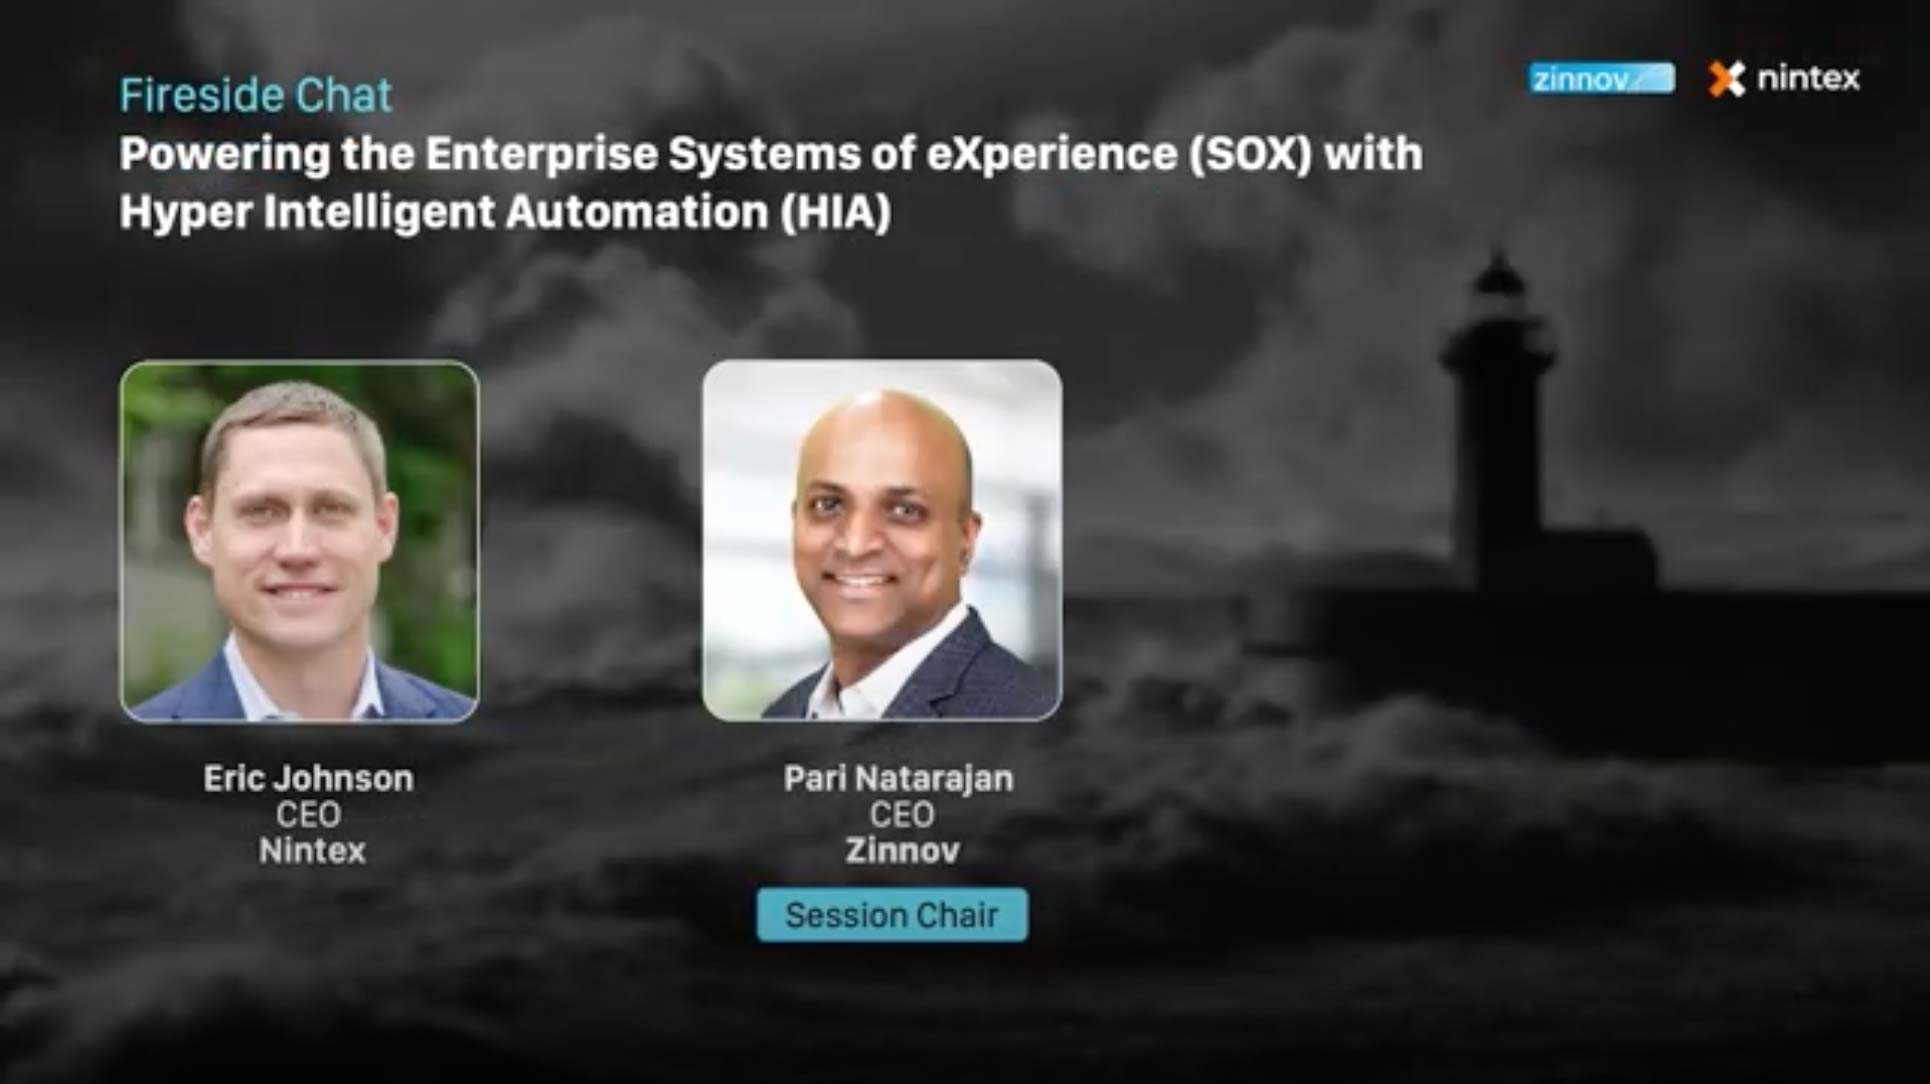 Powering the Enterprise Systems of eXperience (SOX) with HIA​ | Fireside Chat